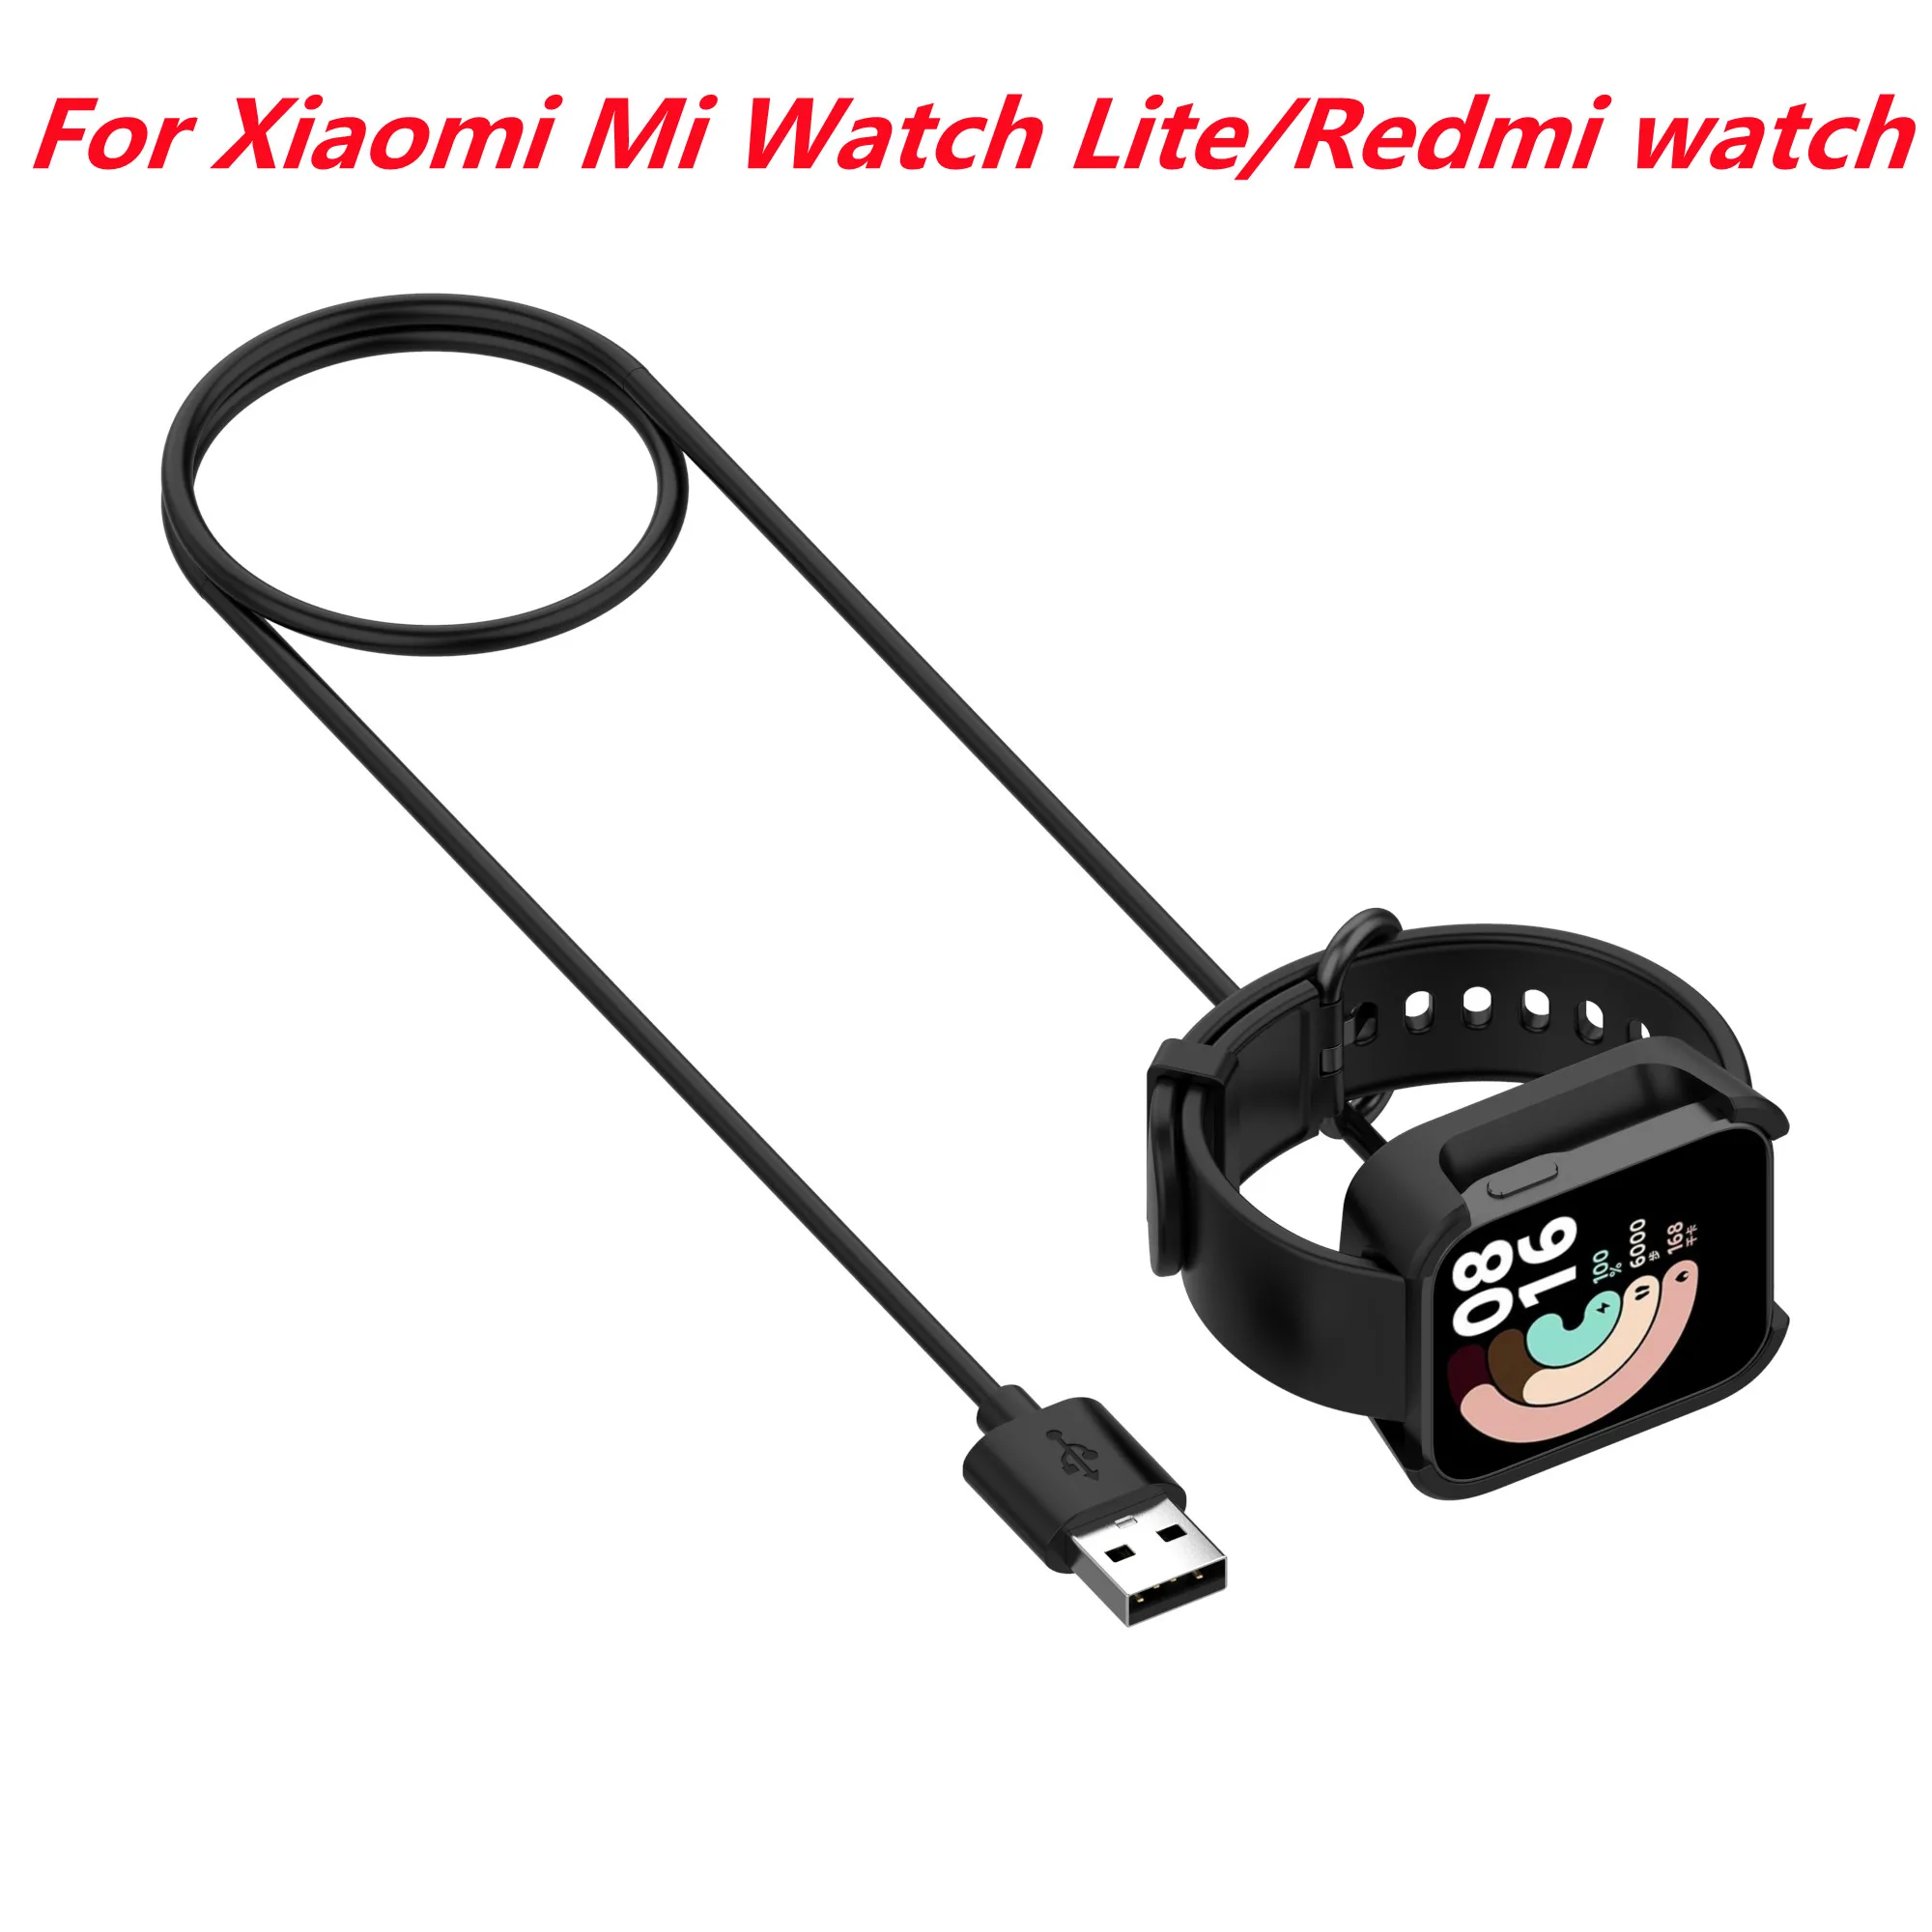 1M USB Universal Charger For Xiaomi Mi Watch Lite/Redmi Watch Portable High Quality Fast Charging Cable Set With Magnetic